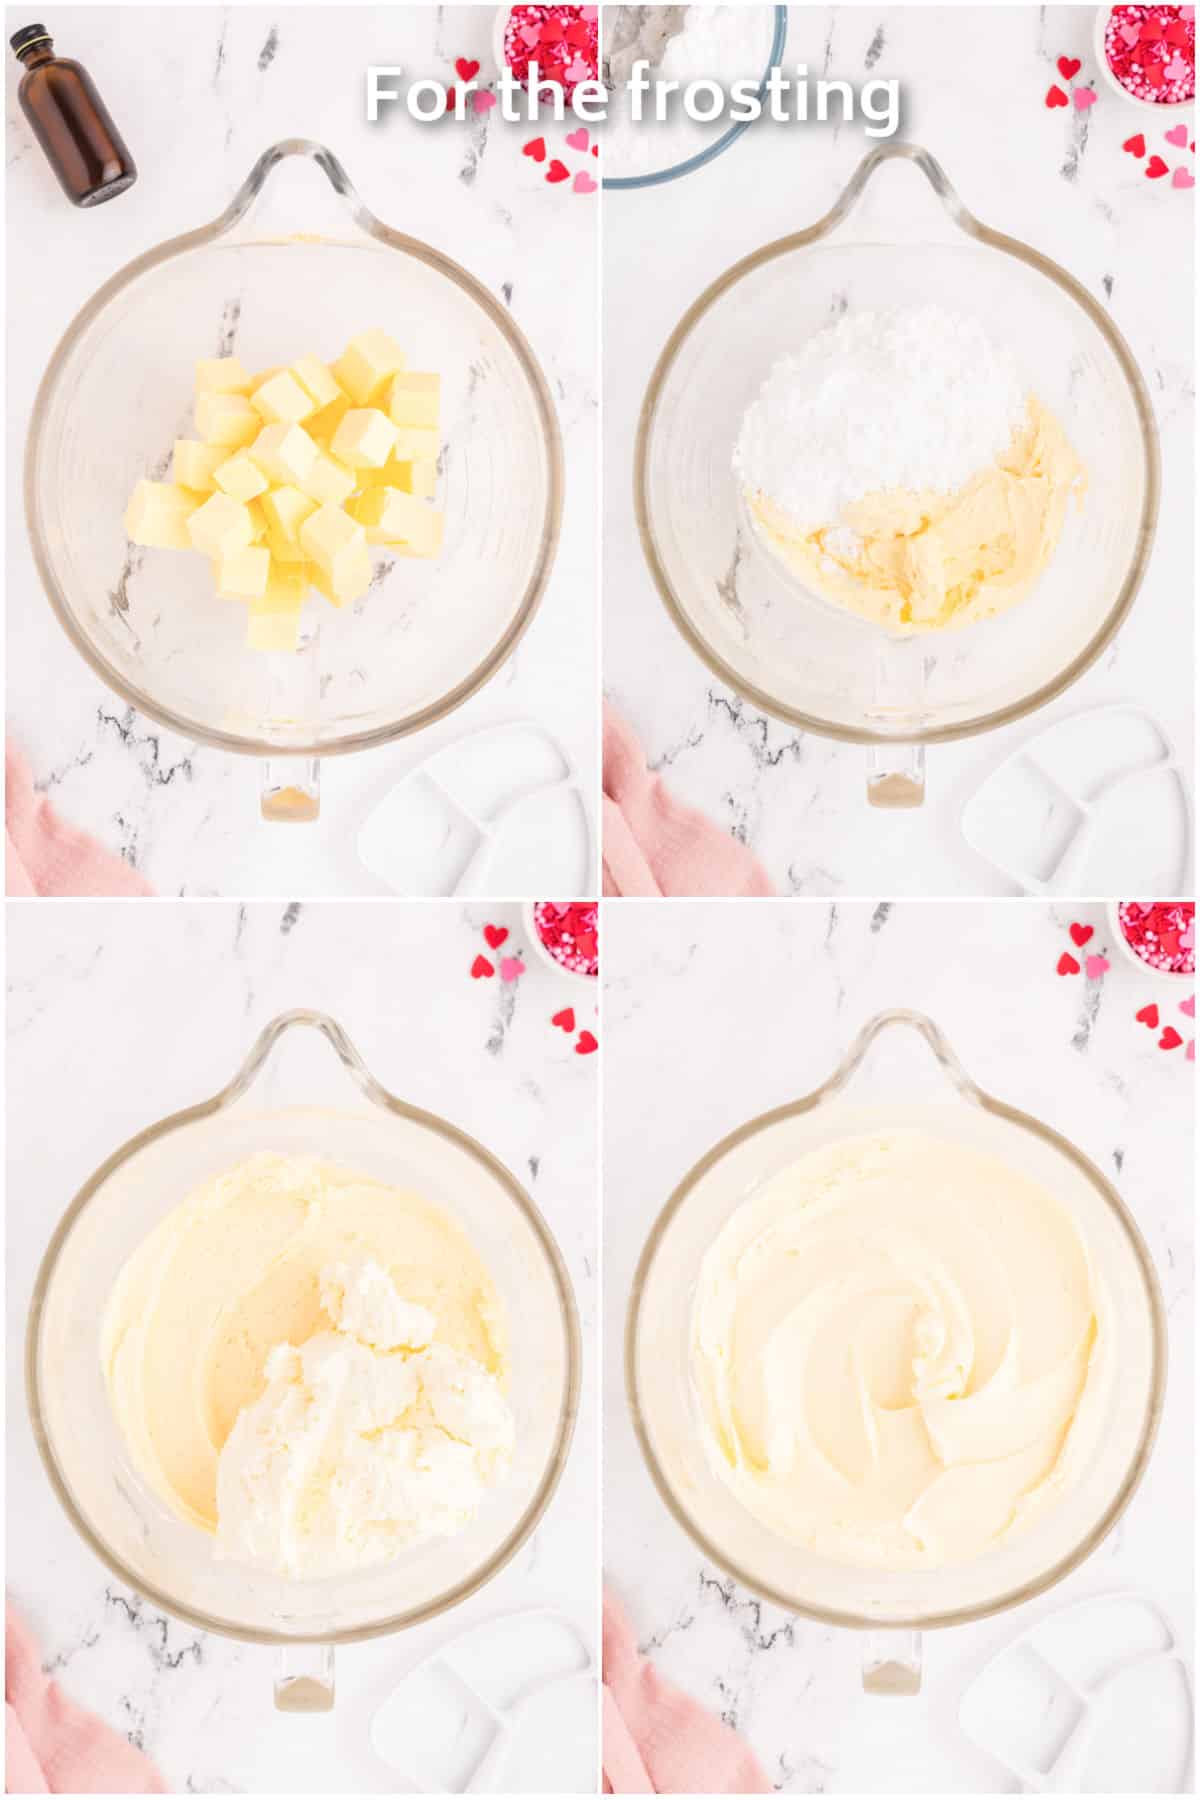 Cream cheese frosting being made in a mixing bowl.